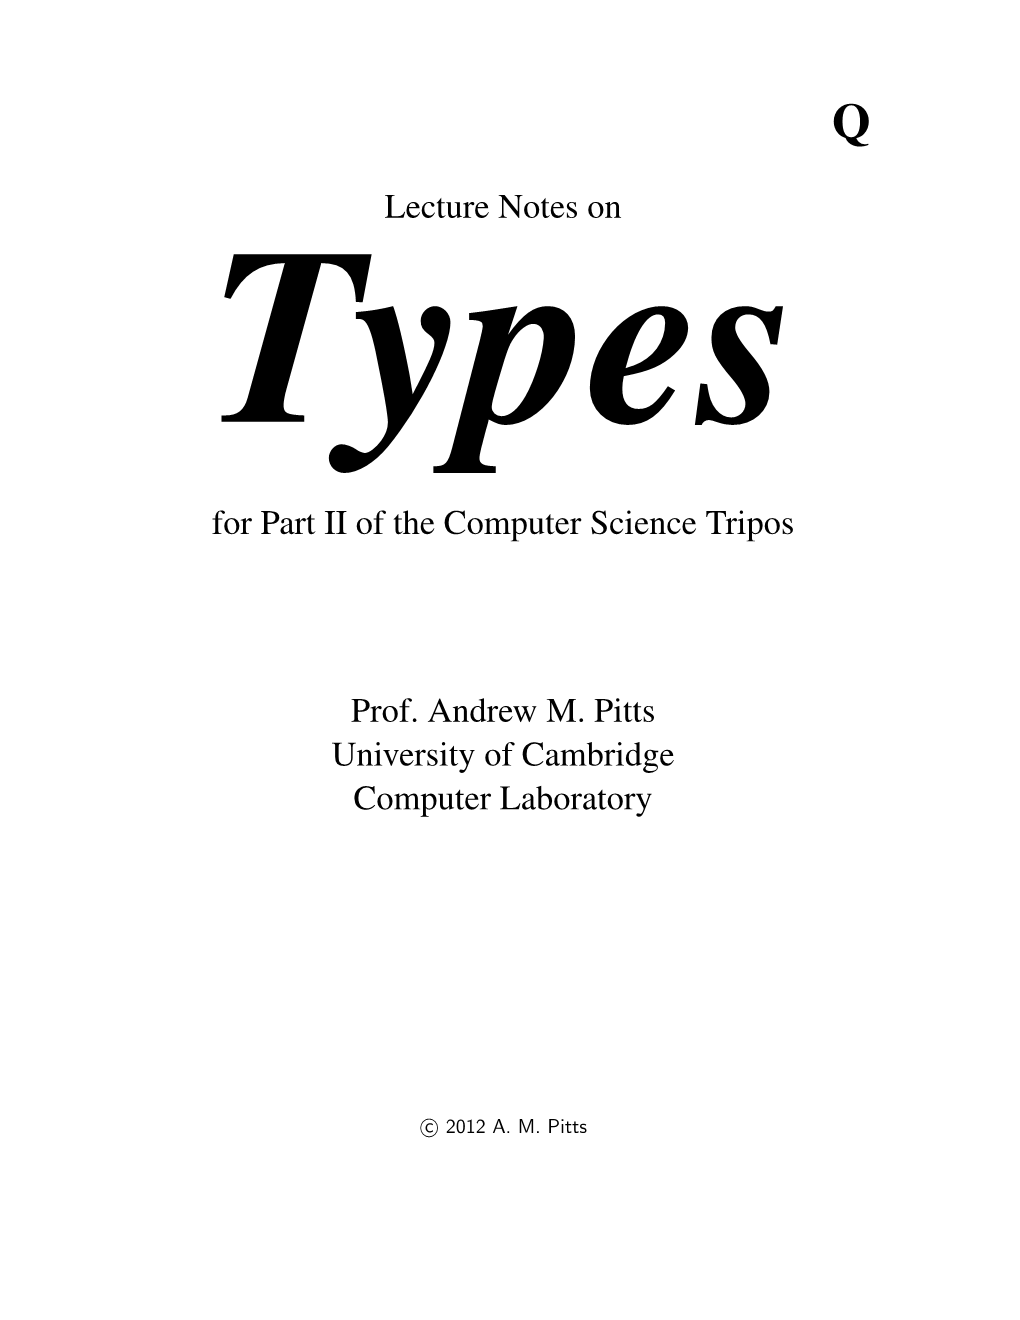 Lecture Notes on Types for Part II of the Computer Science Tripos